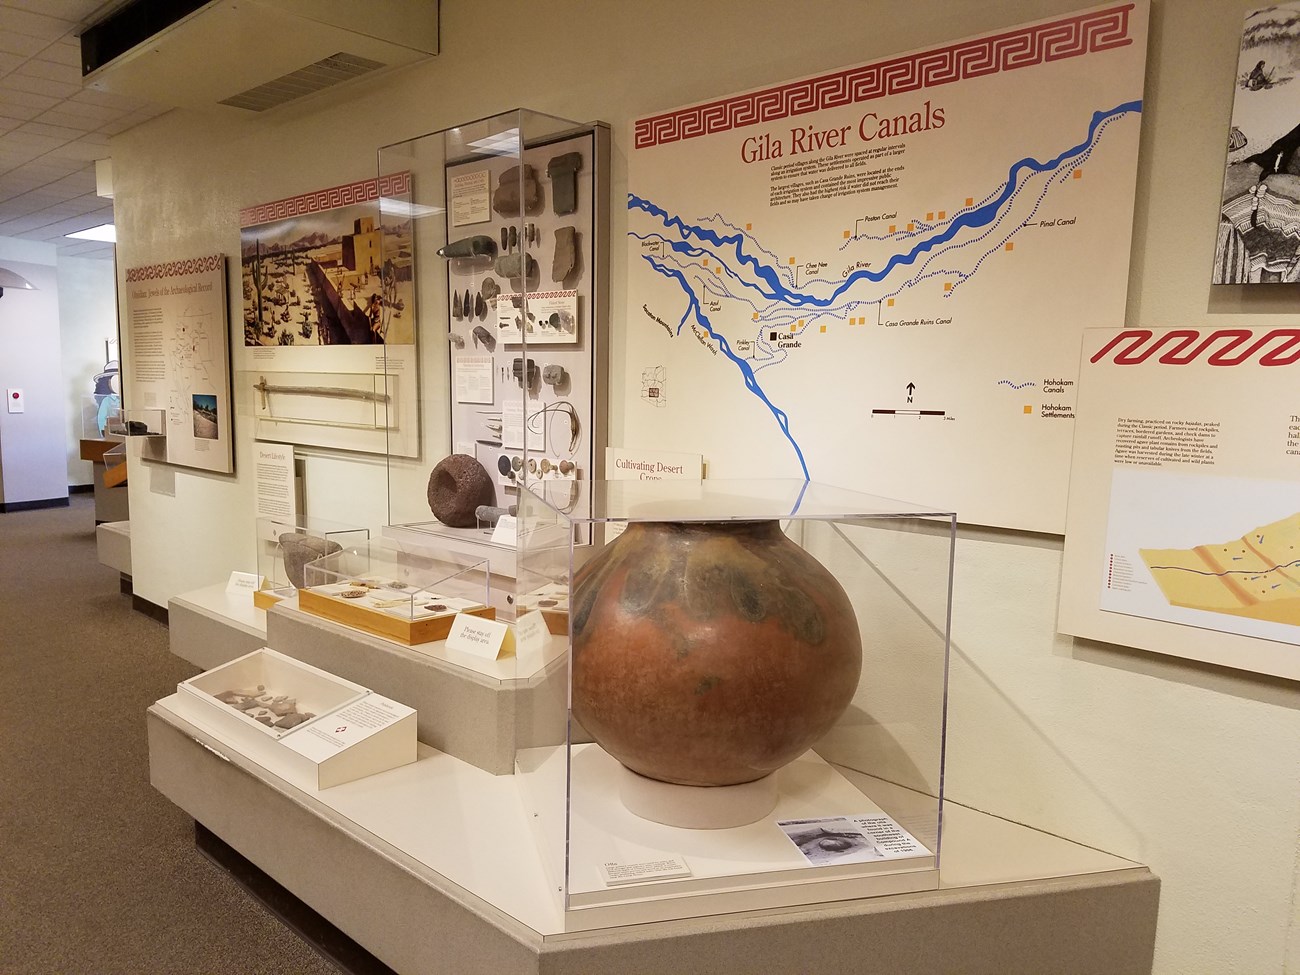 Museum exhibit with about Gila River Canals with signs and pottery pieces